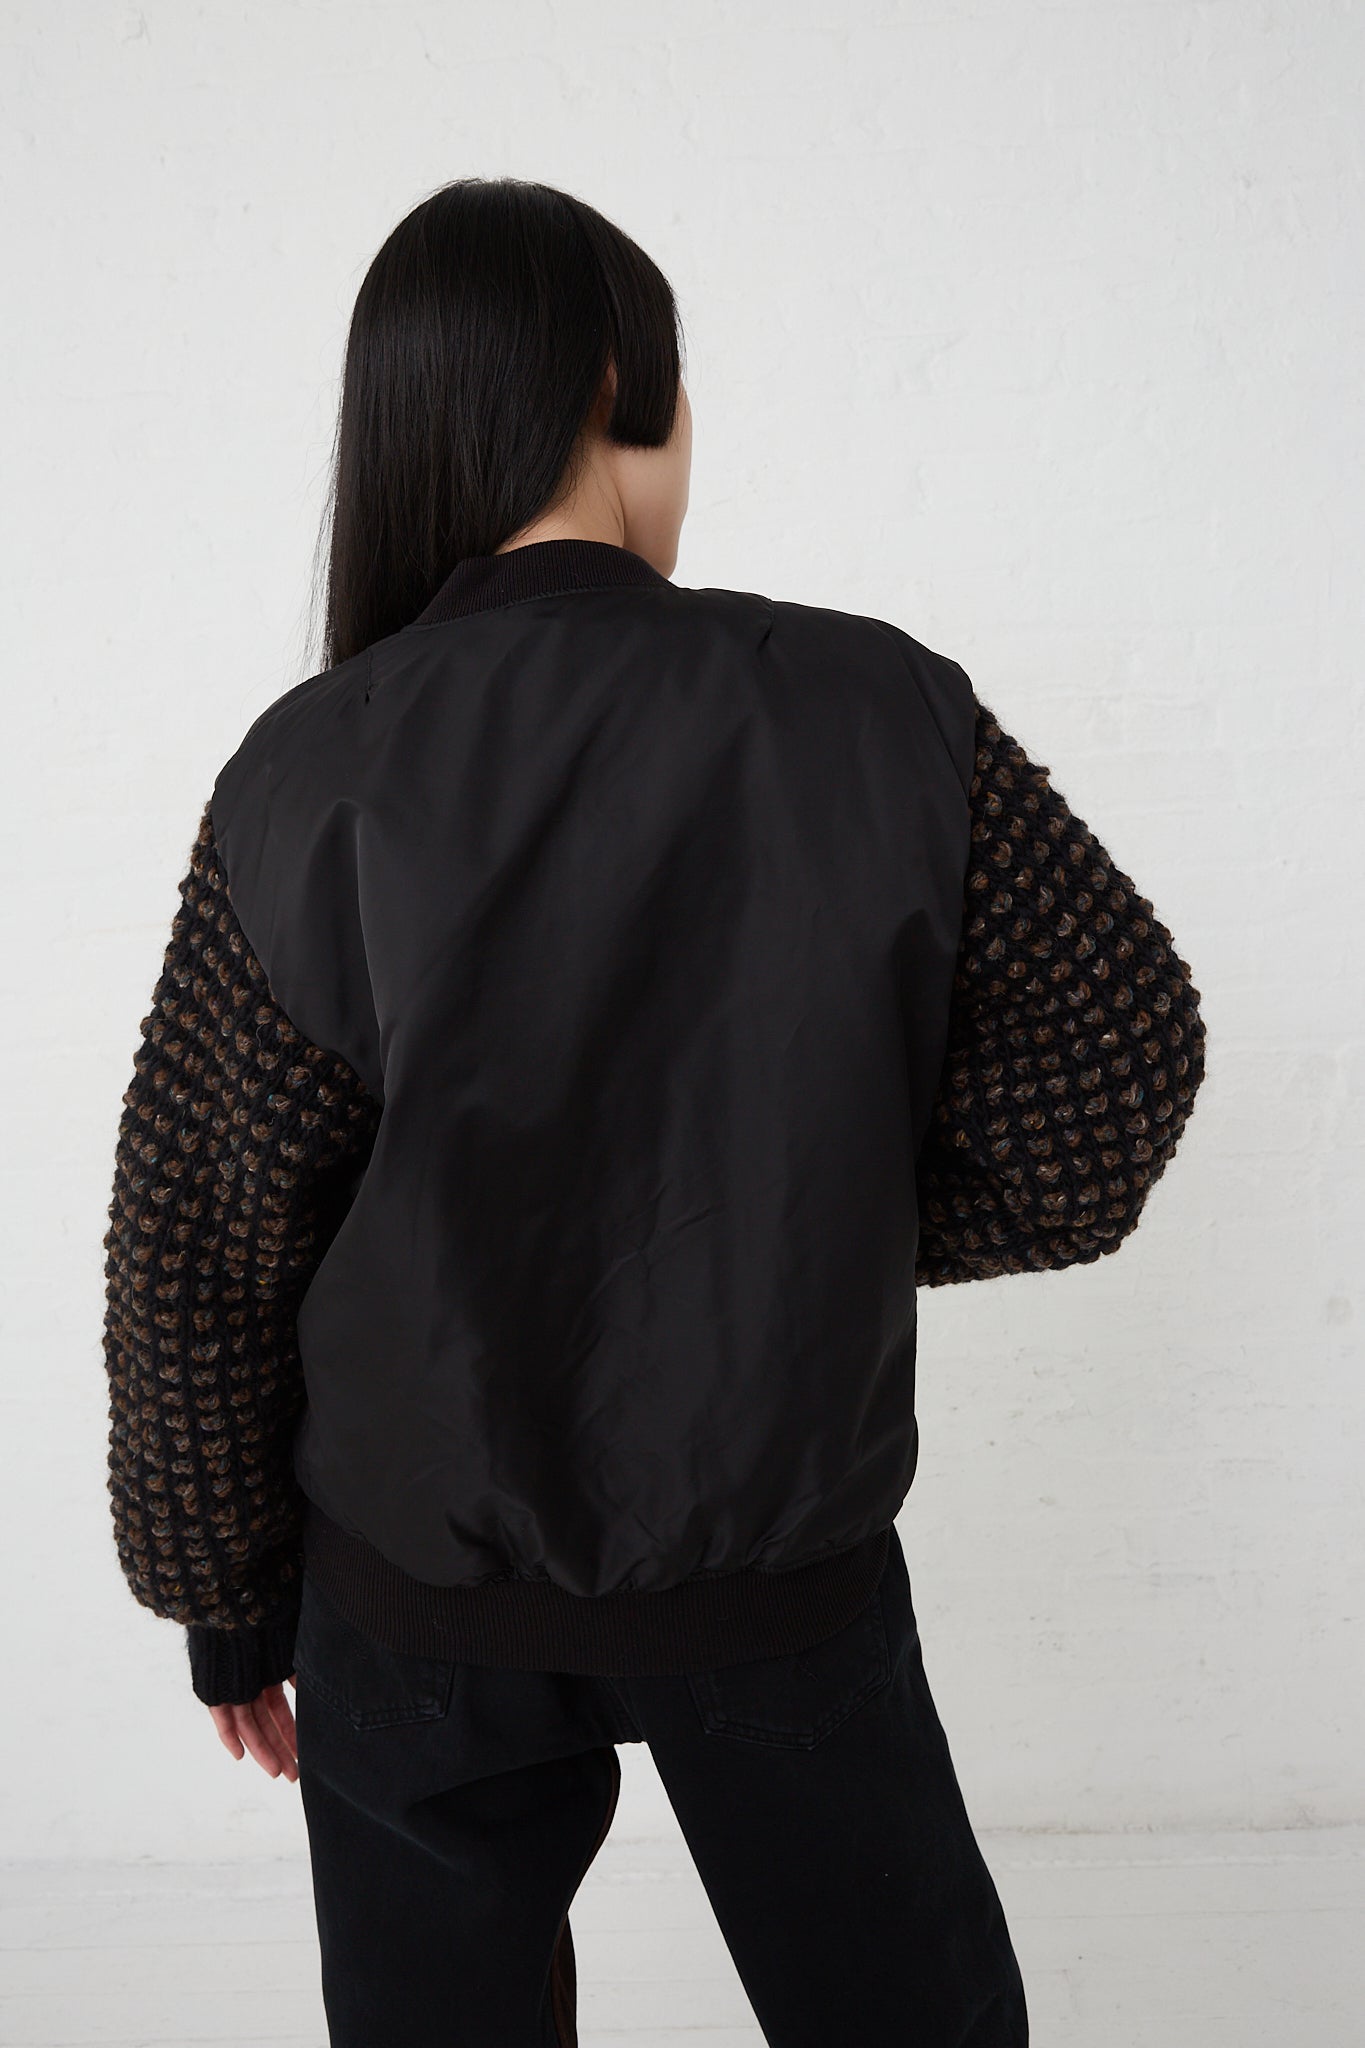 A woman showcasing the Bless Sleeve Bomber No. 70 in Black, an oversized fit black bomber jacket made of a nylon and wool blend.